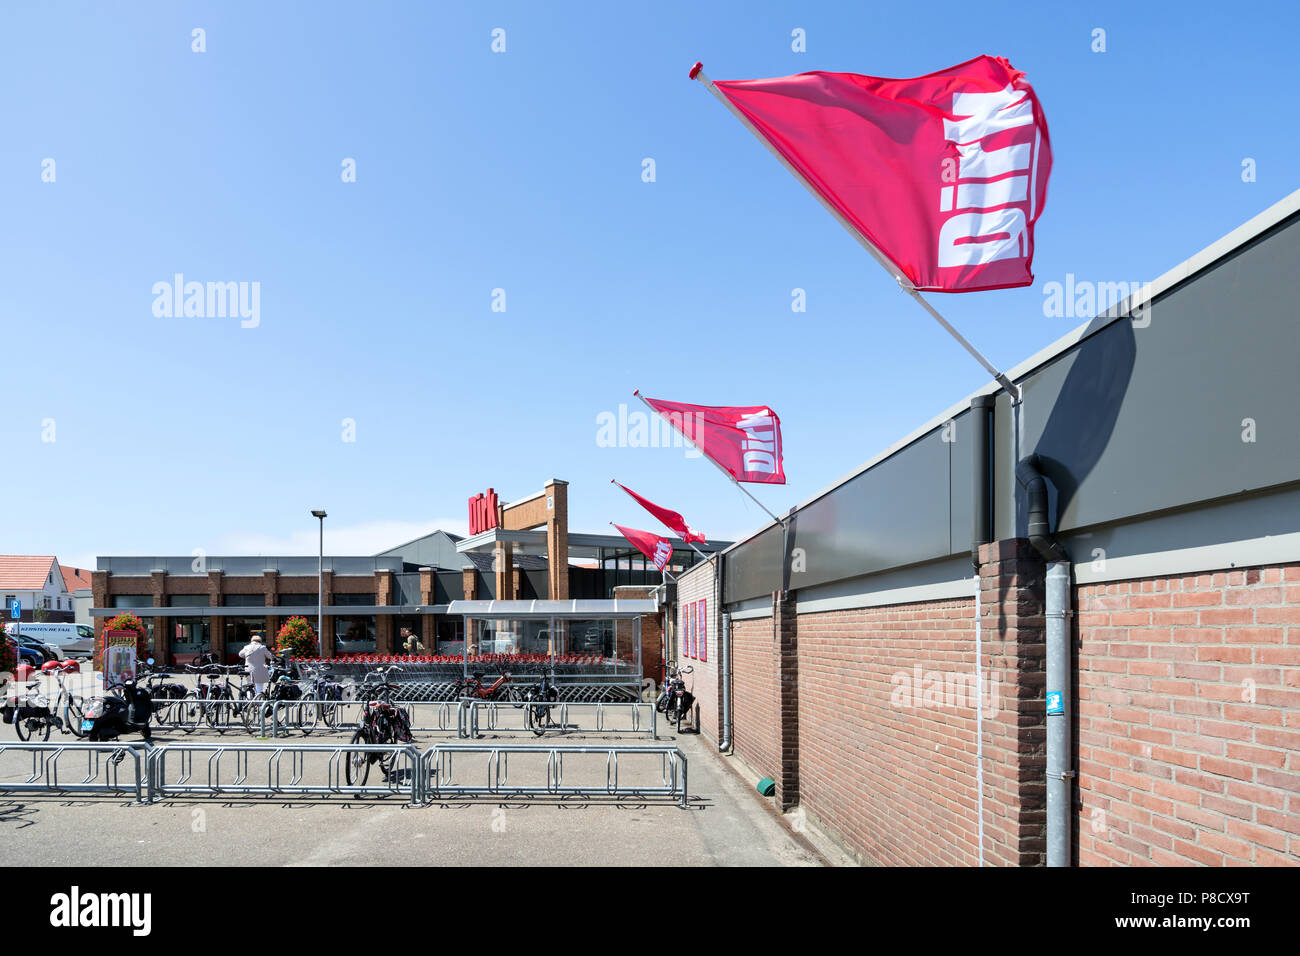 Dirk supermarket in Katwijk. Dirk van den Broek is a Dutch retail company  and a member of Superunie, a Dutch purchasing organization for supermarkets  Stock Photo - Alamy